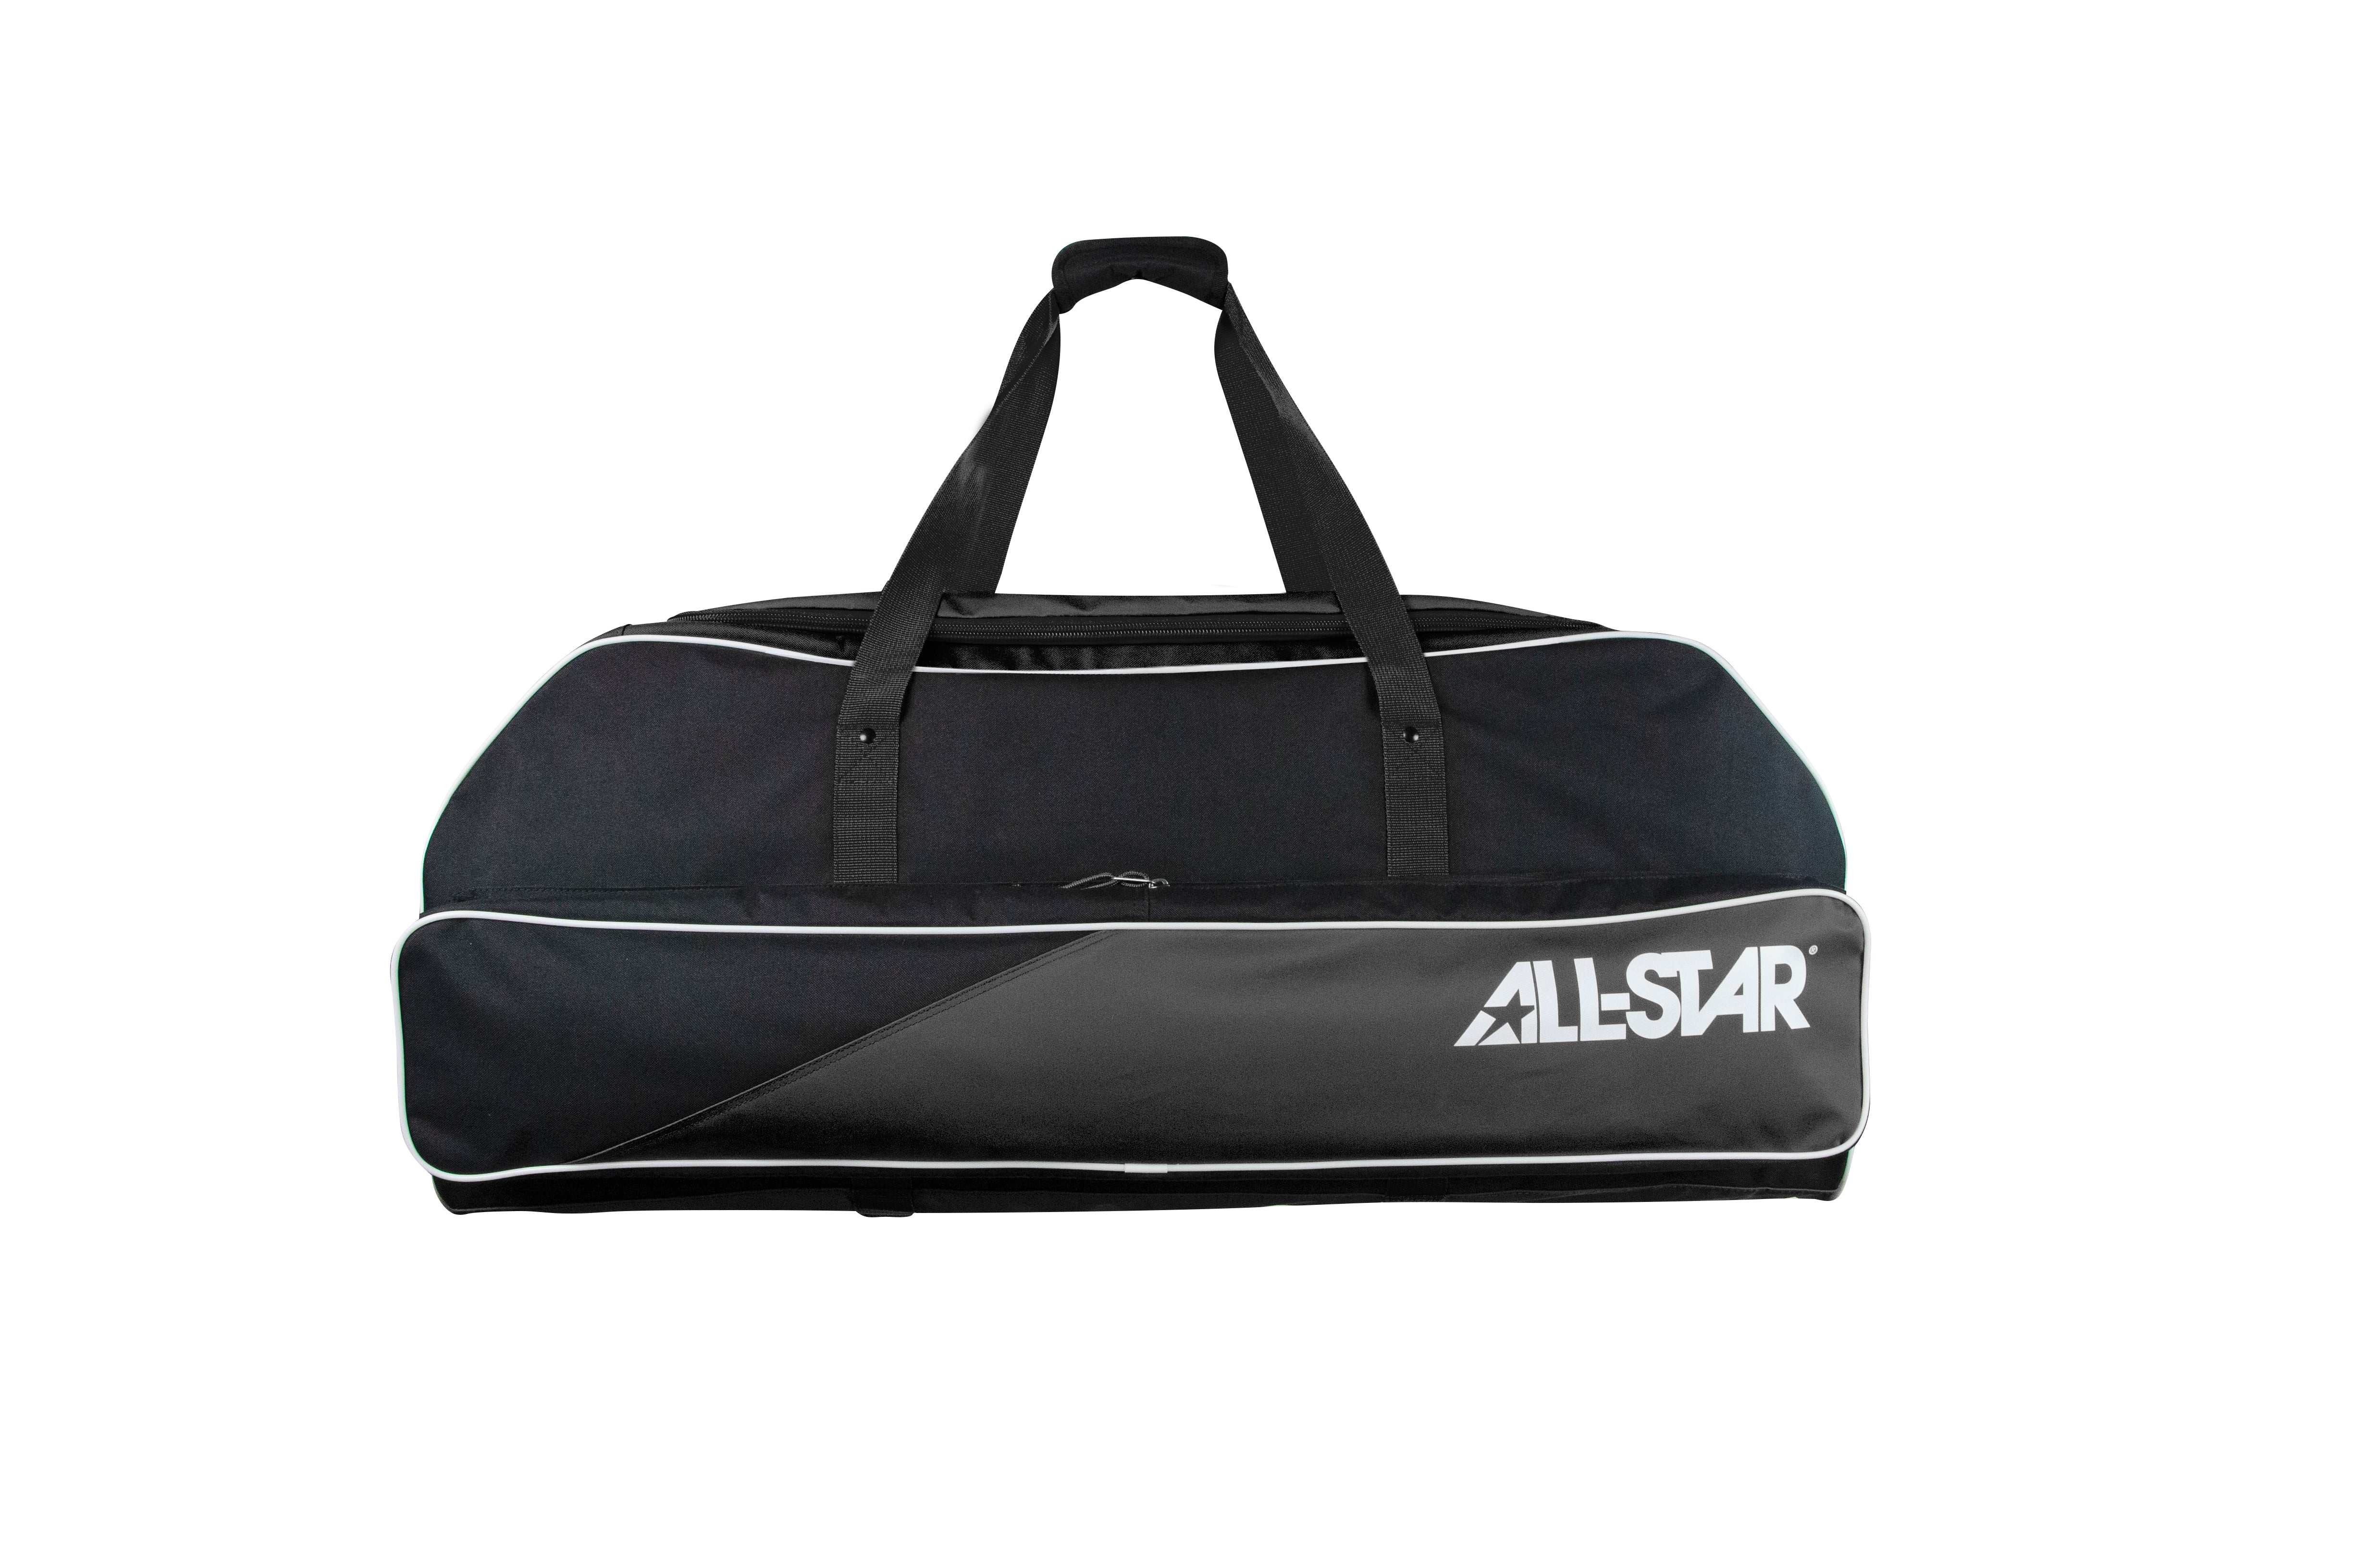 Players Pro Carry Bag/One set of gear & three bats - Pro Game Sports